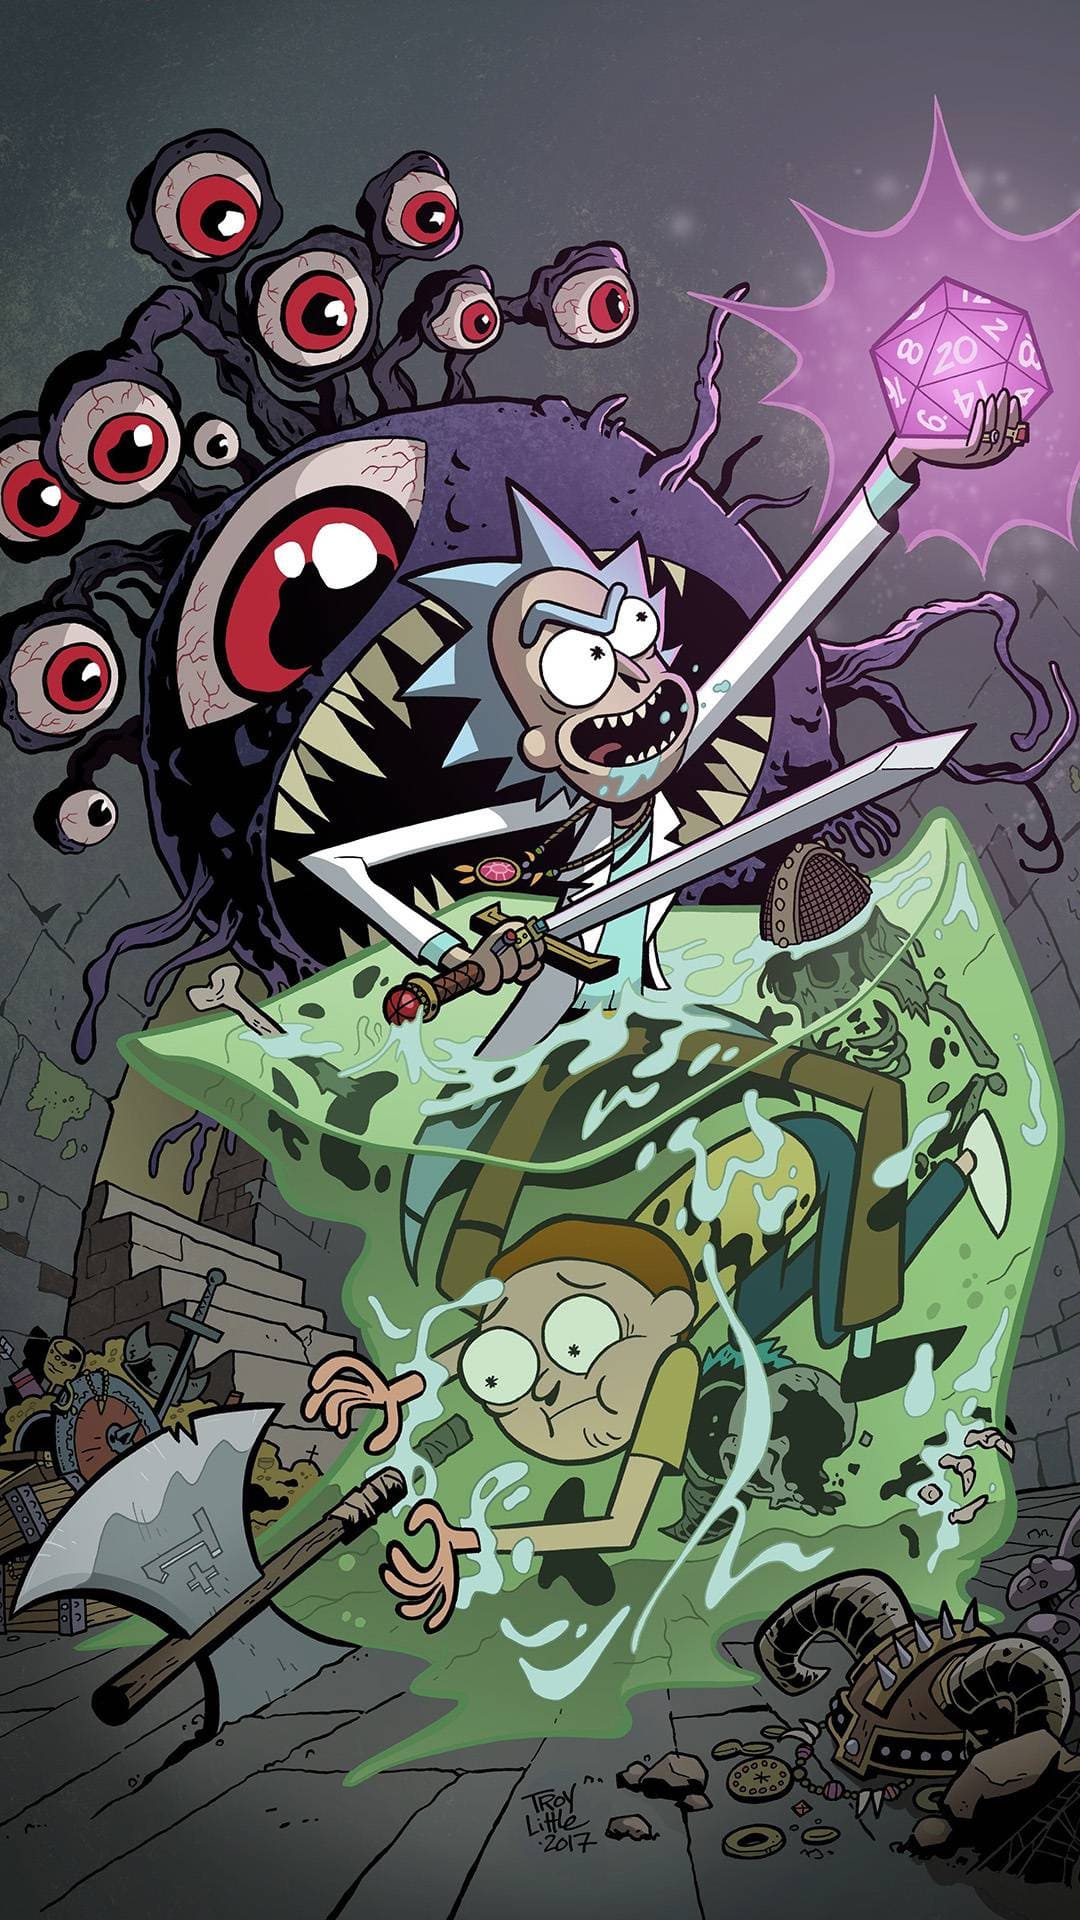 Best Rick and Morty iPhone Wallpaper